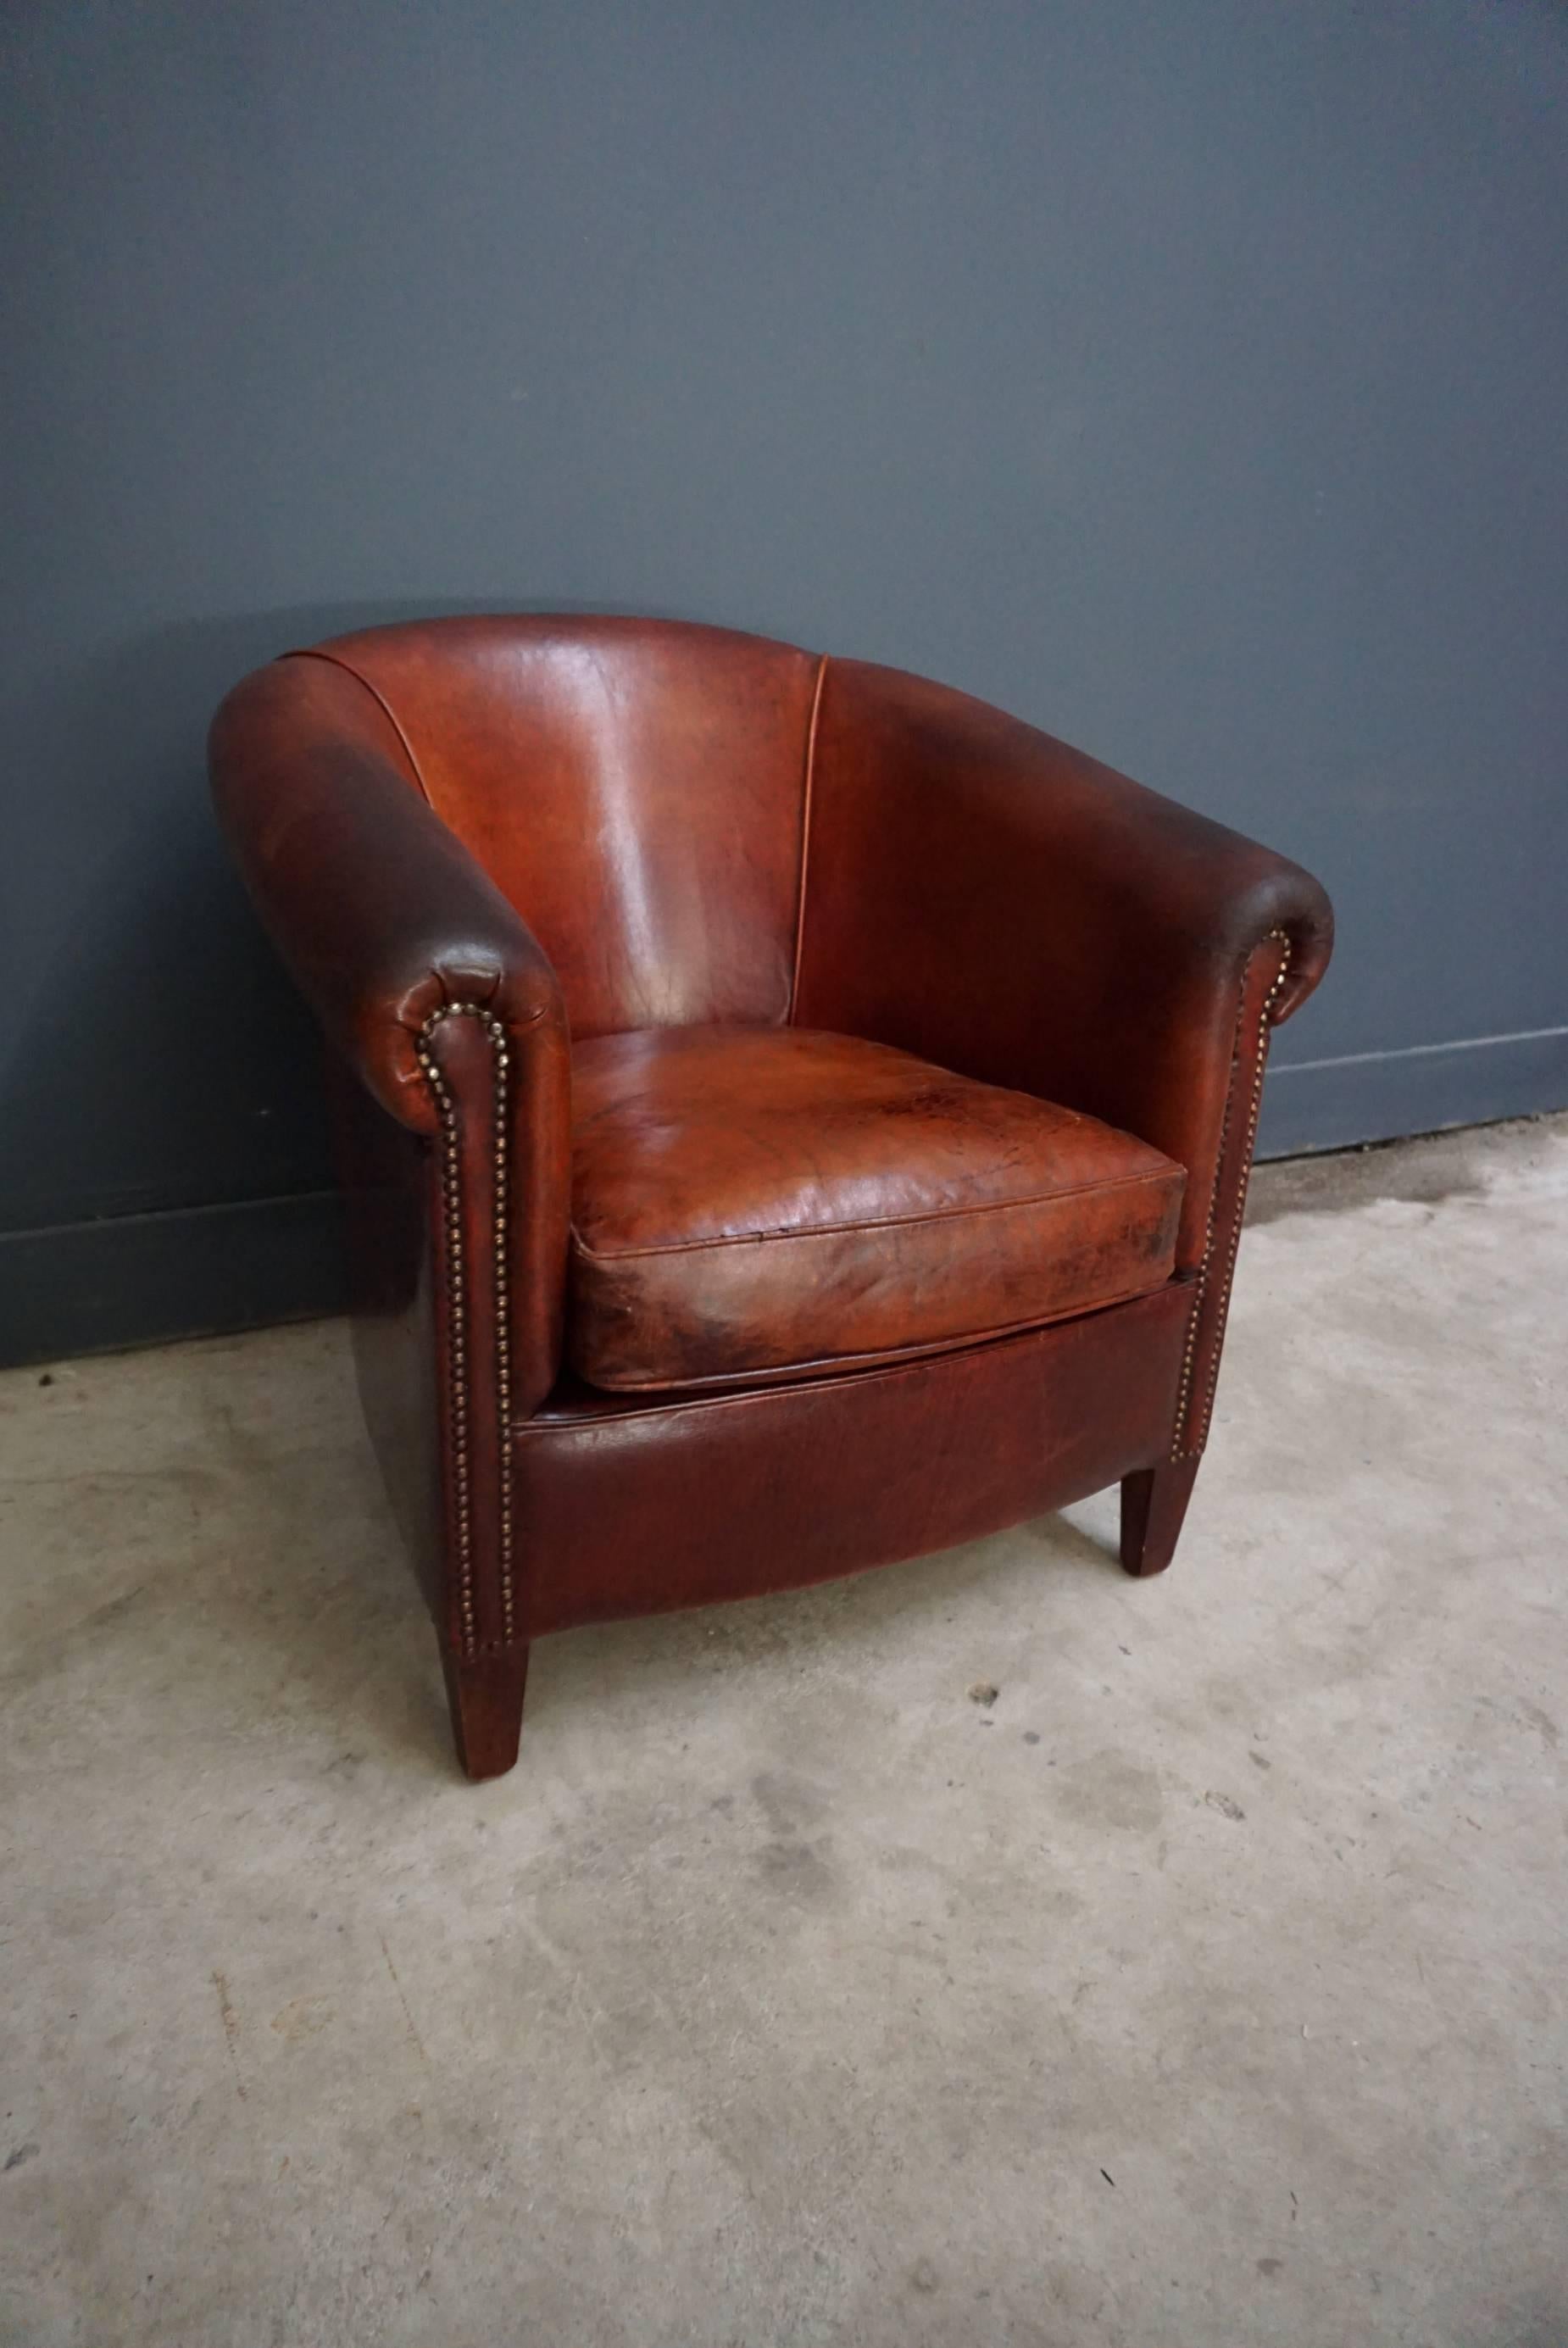 This vintage club chair is upholstered with cognac-colored leather and features metal rivets and wooden legs.